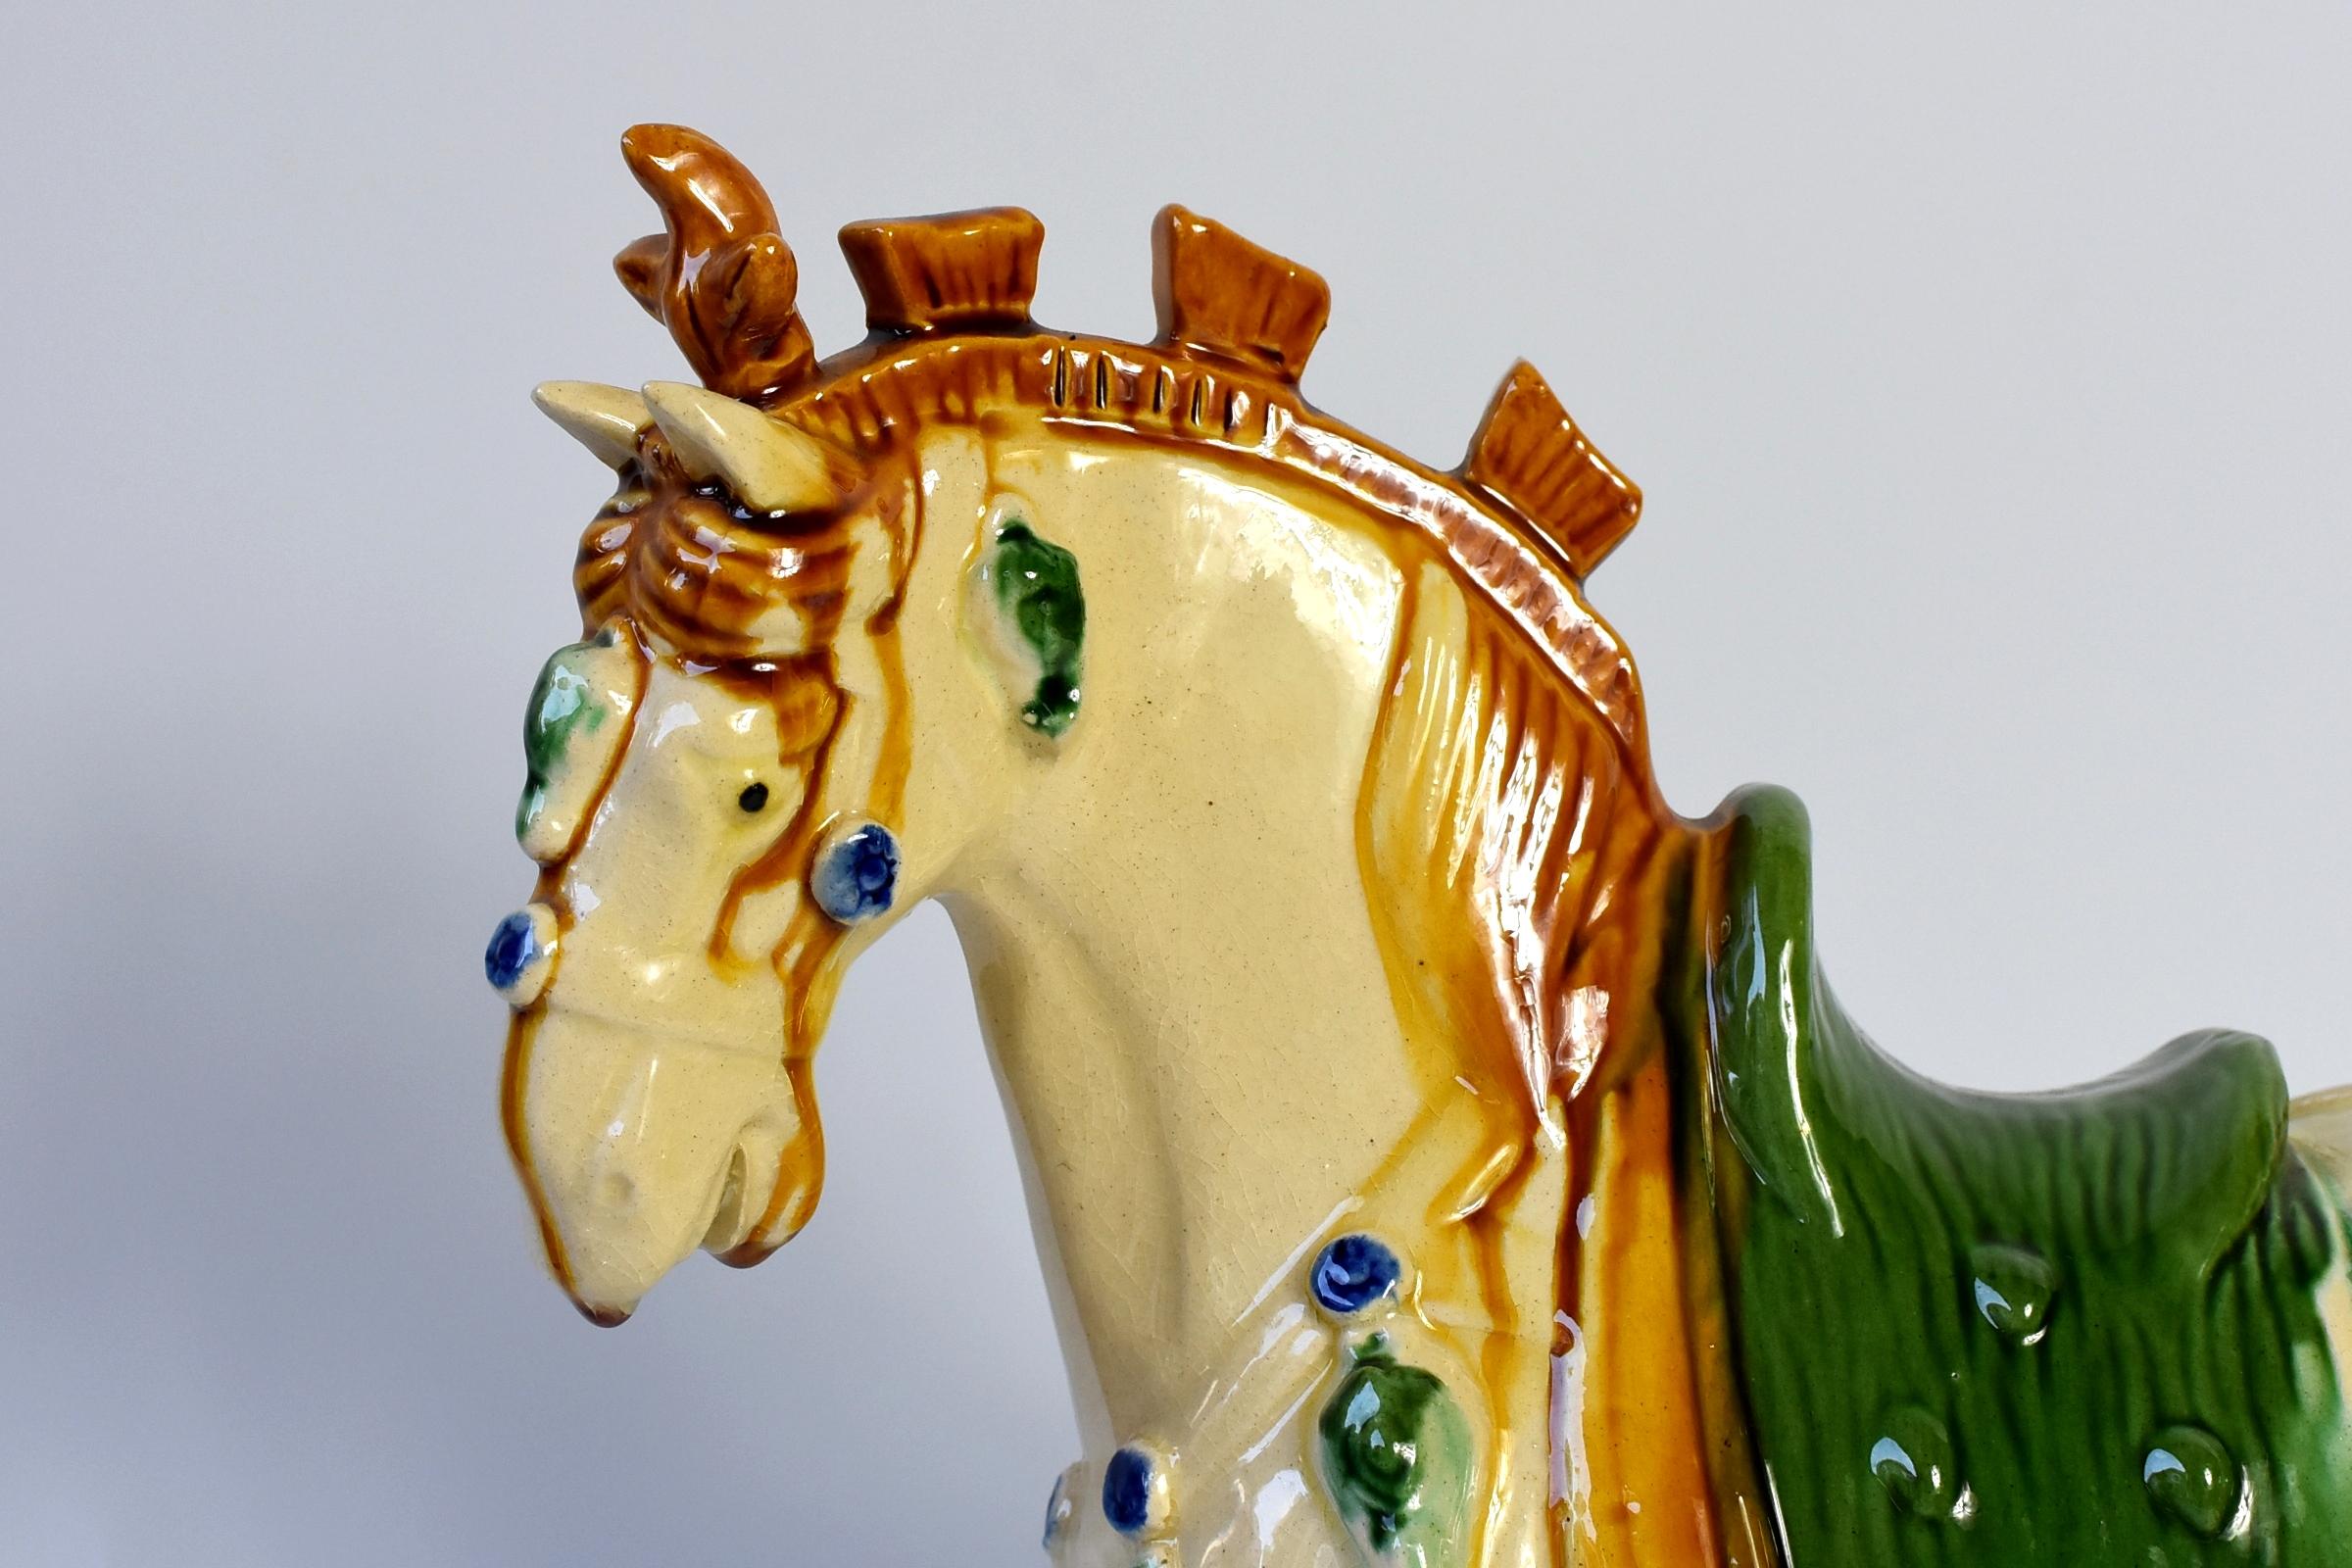 A beautiful cream colored horse in high gloss. This wonderful piece has all the hallmarks of Tang San Cai terracotta potteries with skilfully applied glaze achieving amazing artistic effect. Horse's vivid expression bring the piece to life. Its